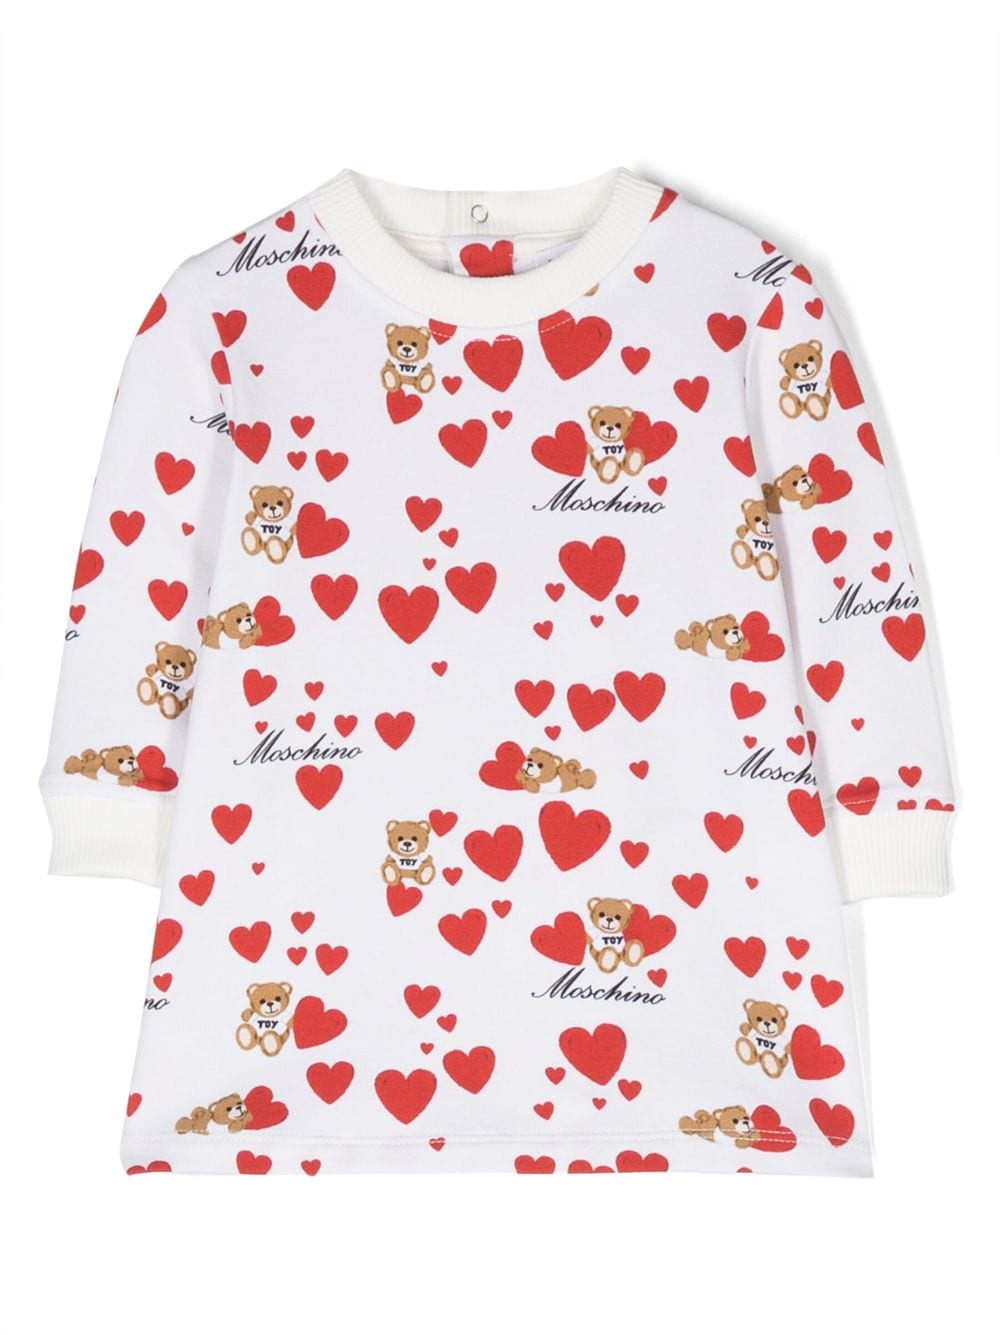 White dress for baby girls with hearts